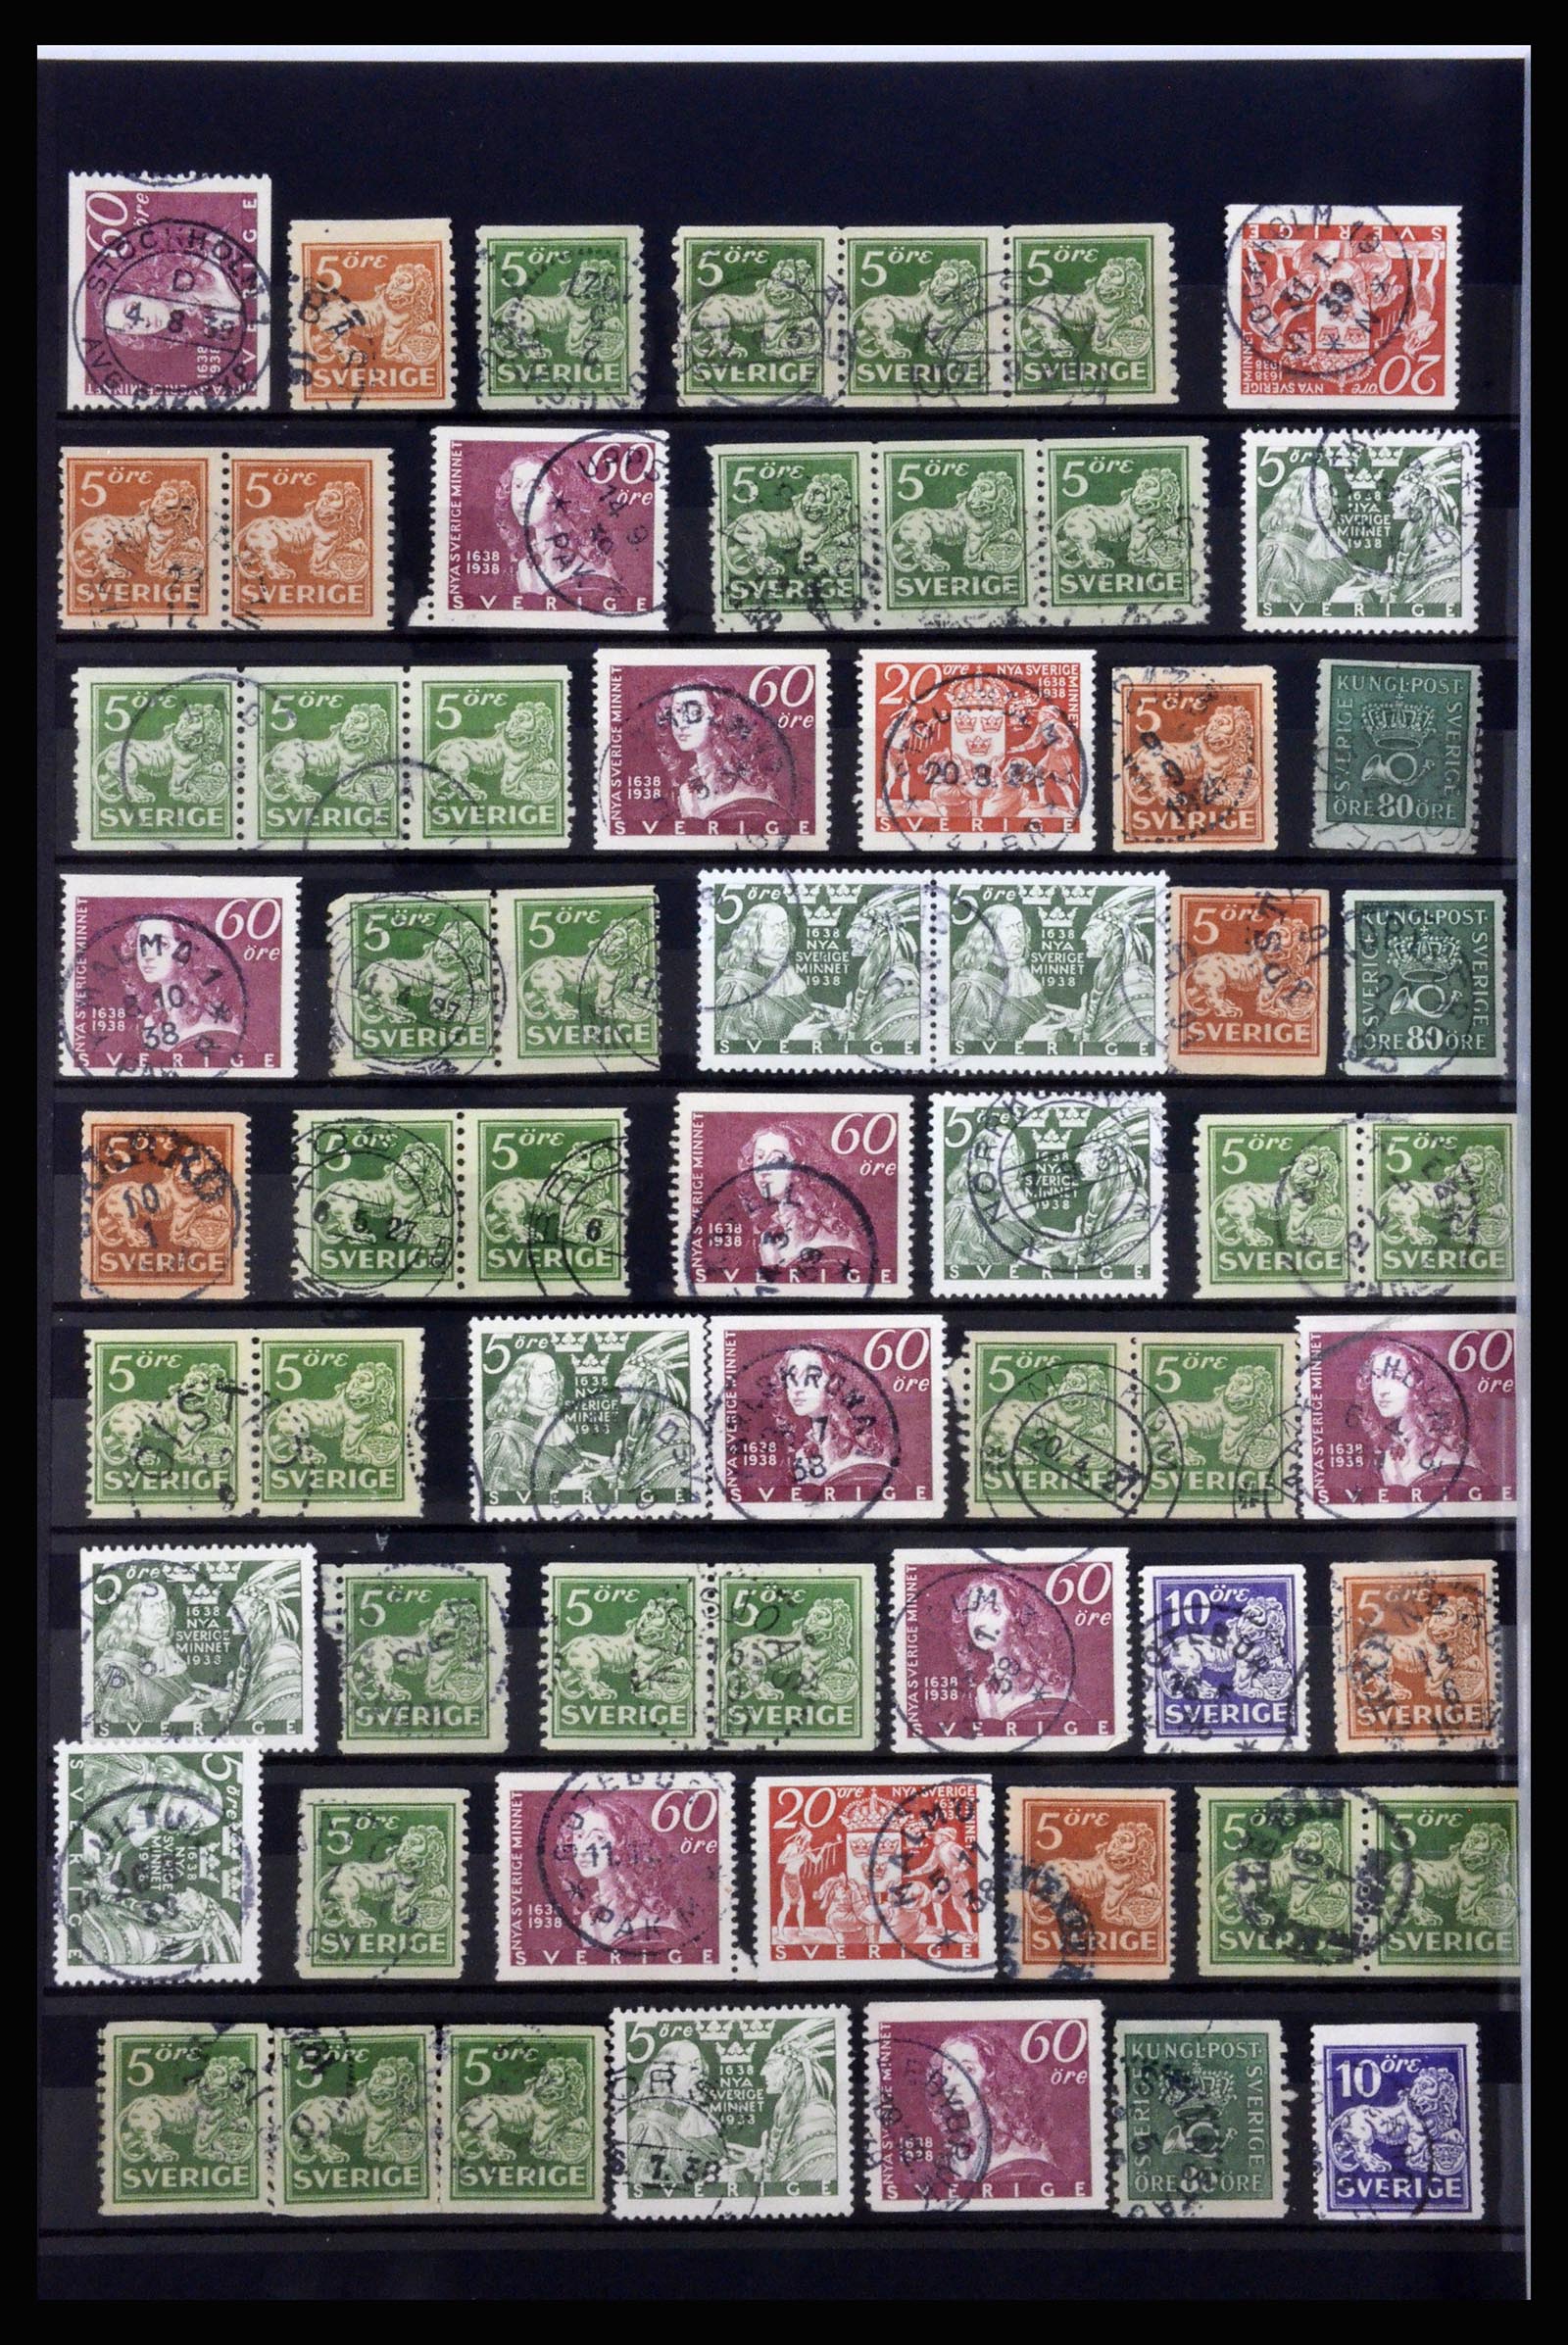 36316 038 - Stamp collection 36316 Sweden cancellations 1920-1938.